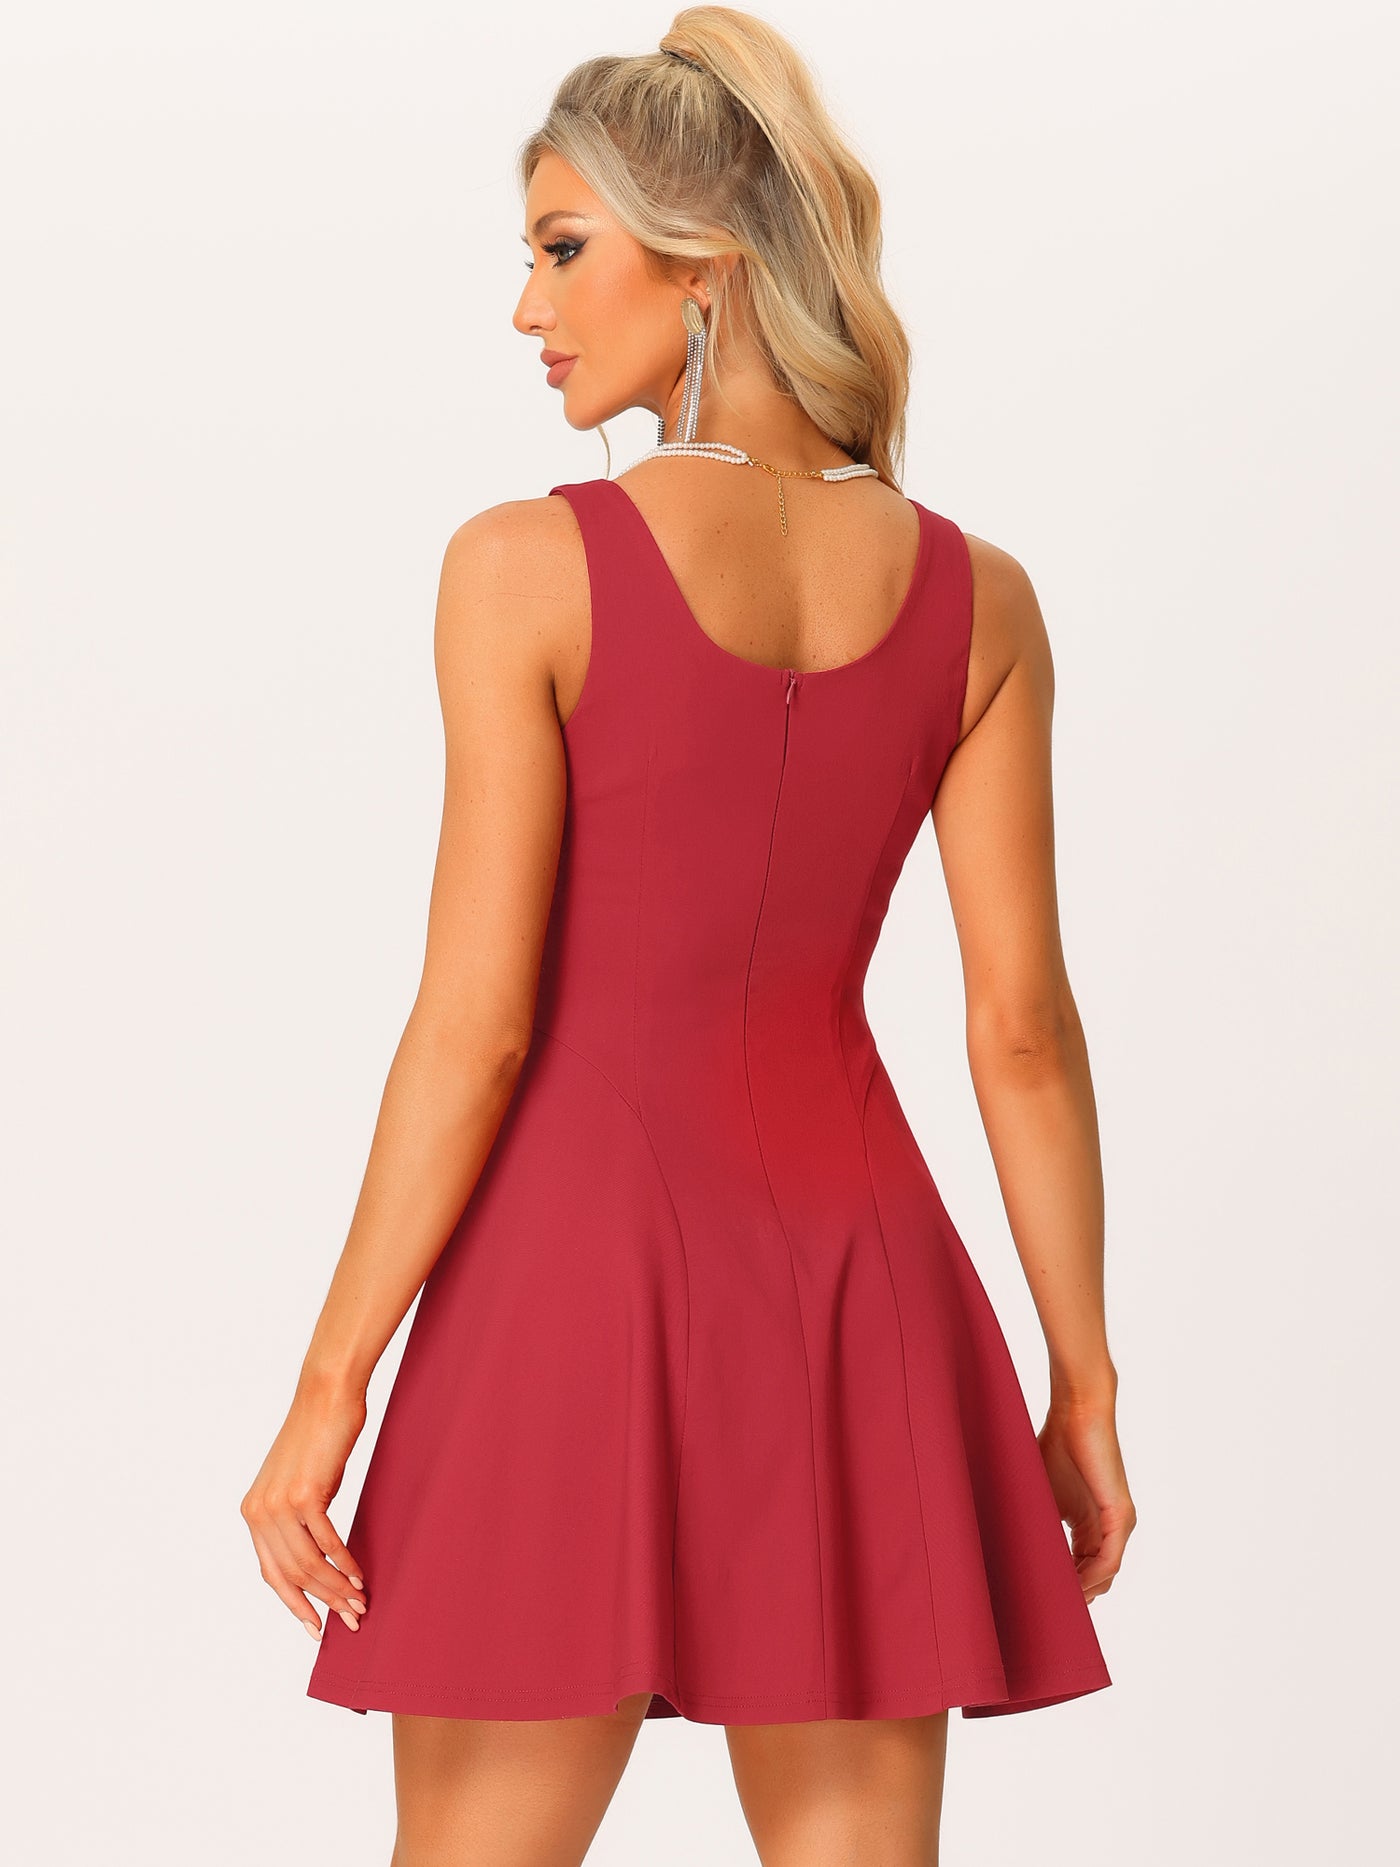 Allegra K Party Sexy Sleeveless Sweetheart Neck Fit and Flared A Line Swing Cocktail Mini Dress